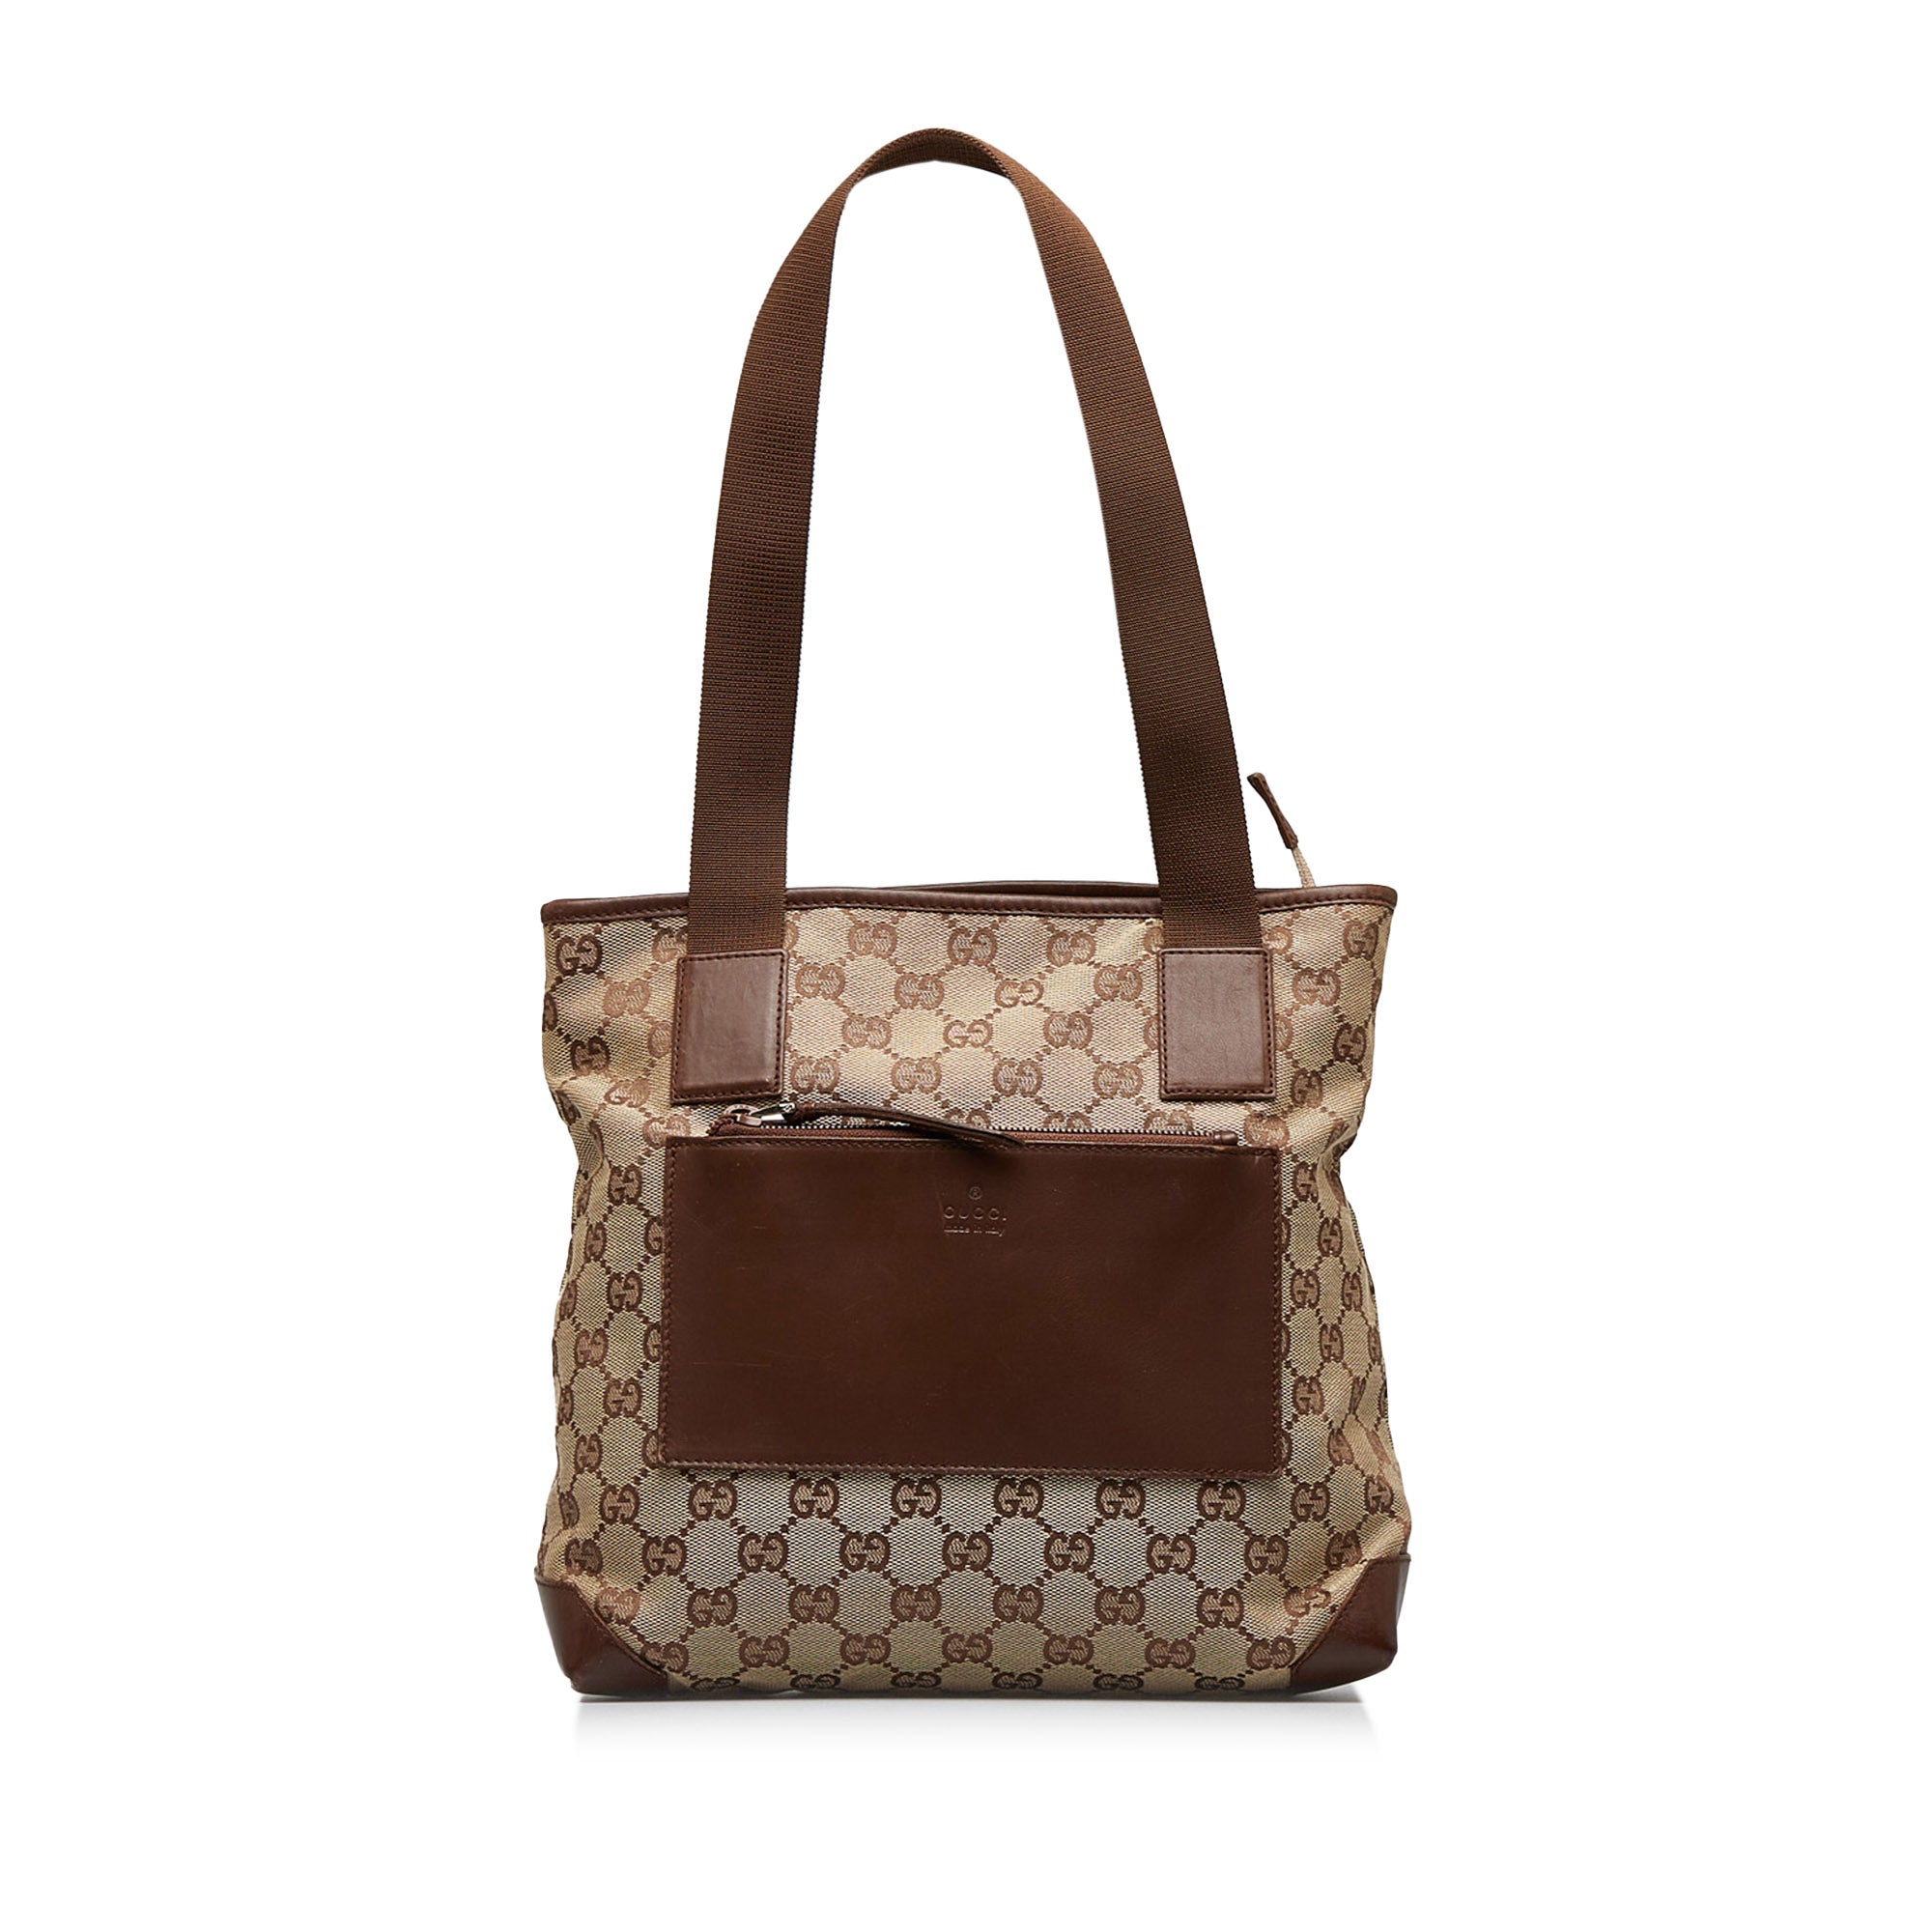 Gucci GG Canvas Shoulder Bag Brown - The Recollective